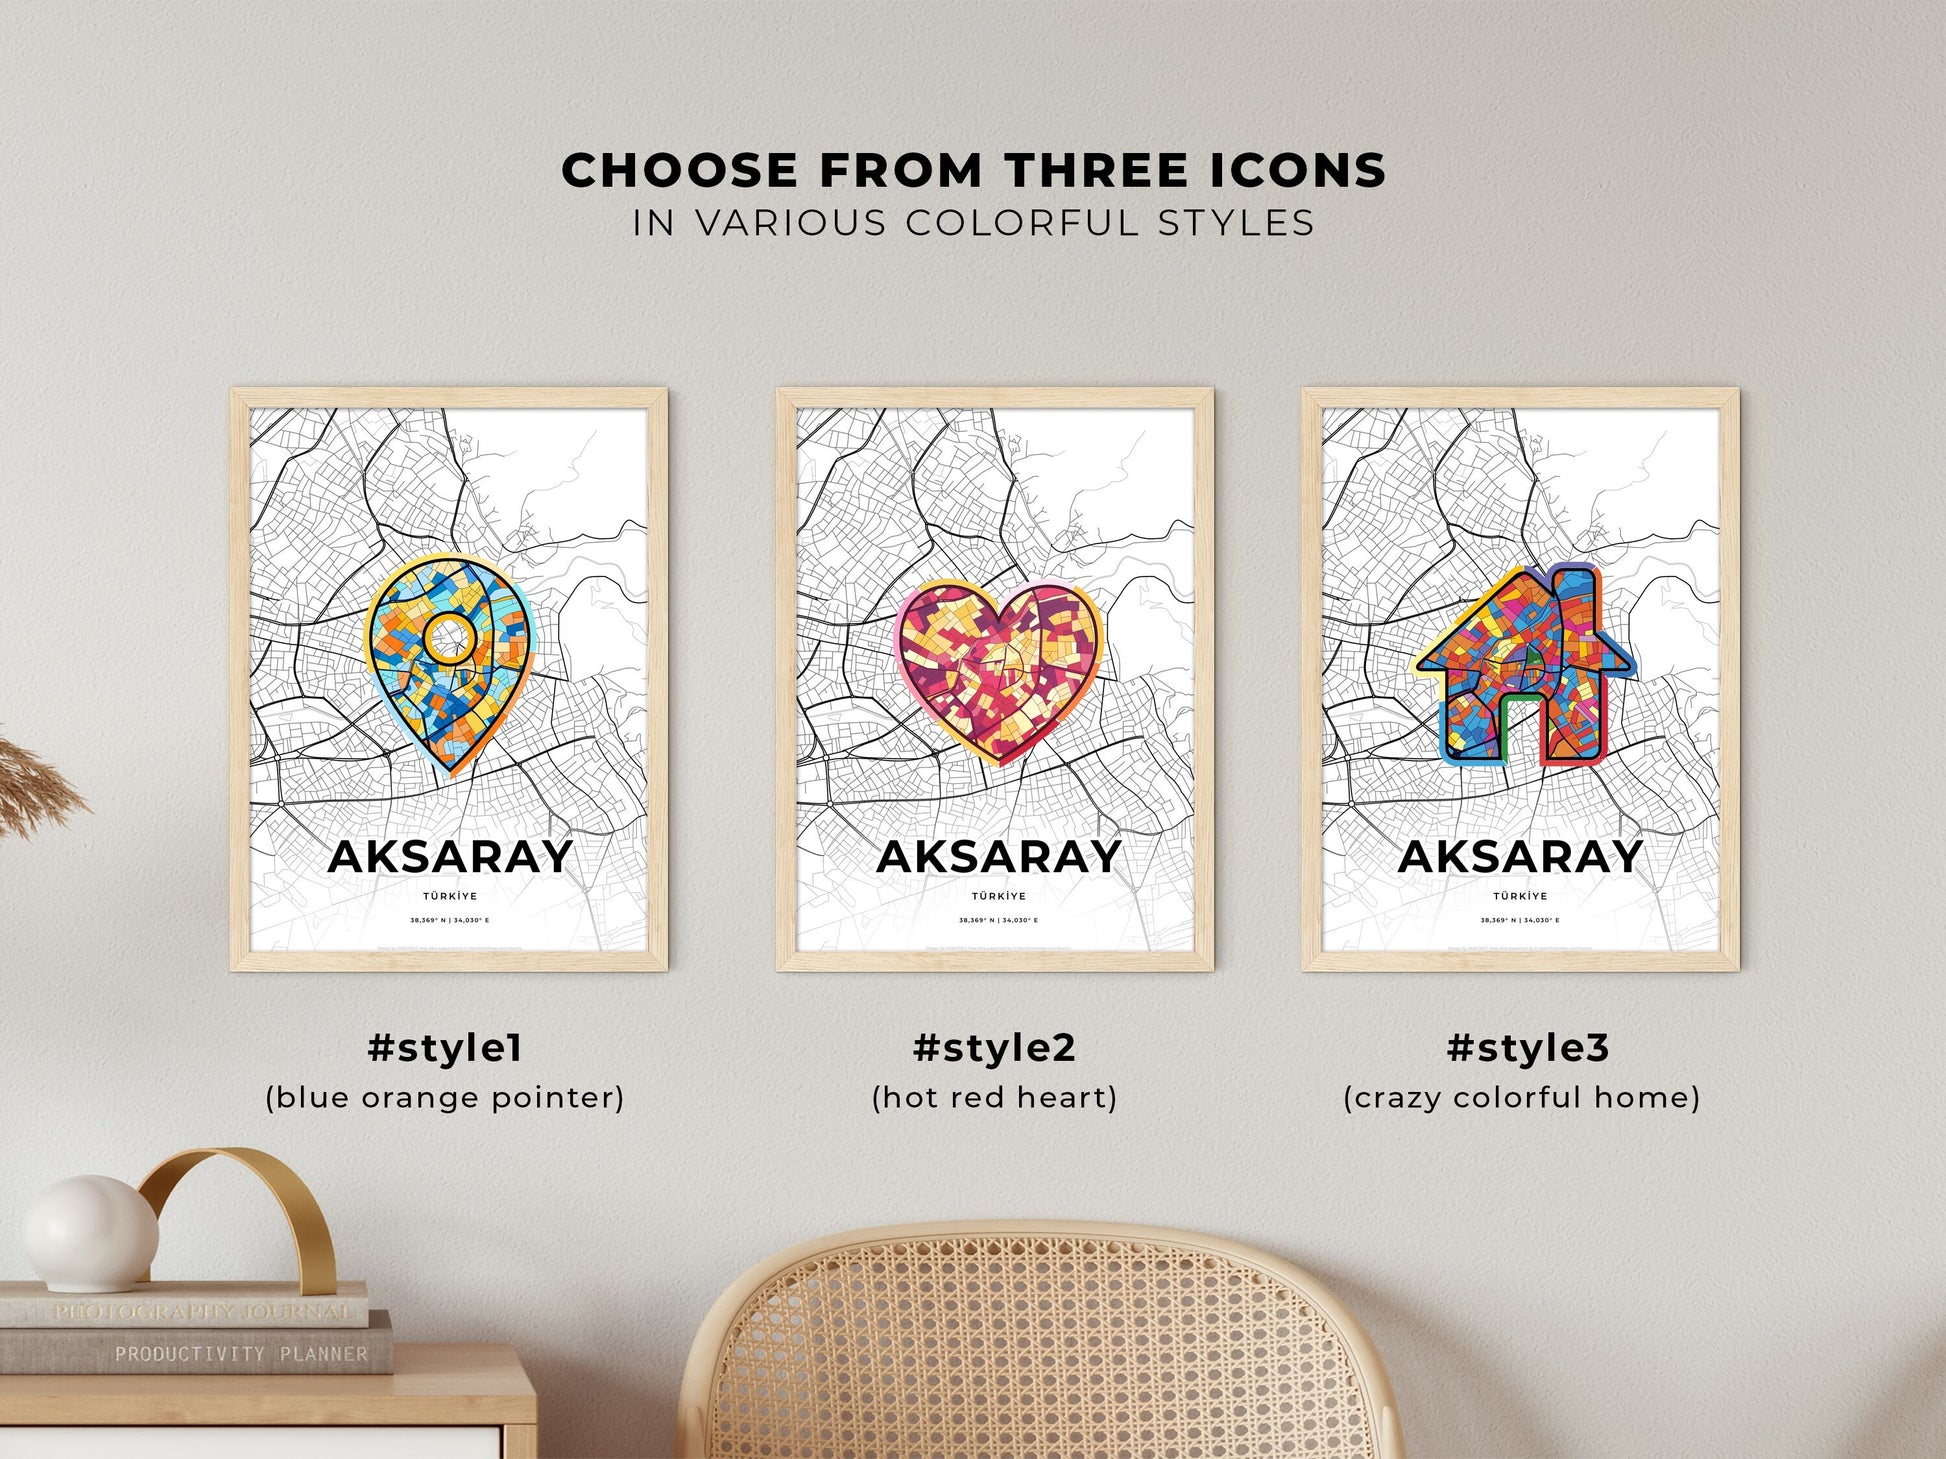 AKSARAY TURKEY minimal art map with a colorful icon. Where it all began, Couple map gift.